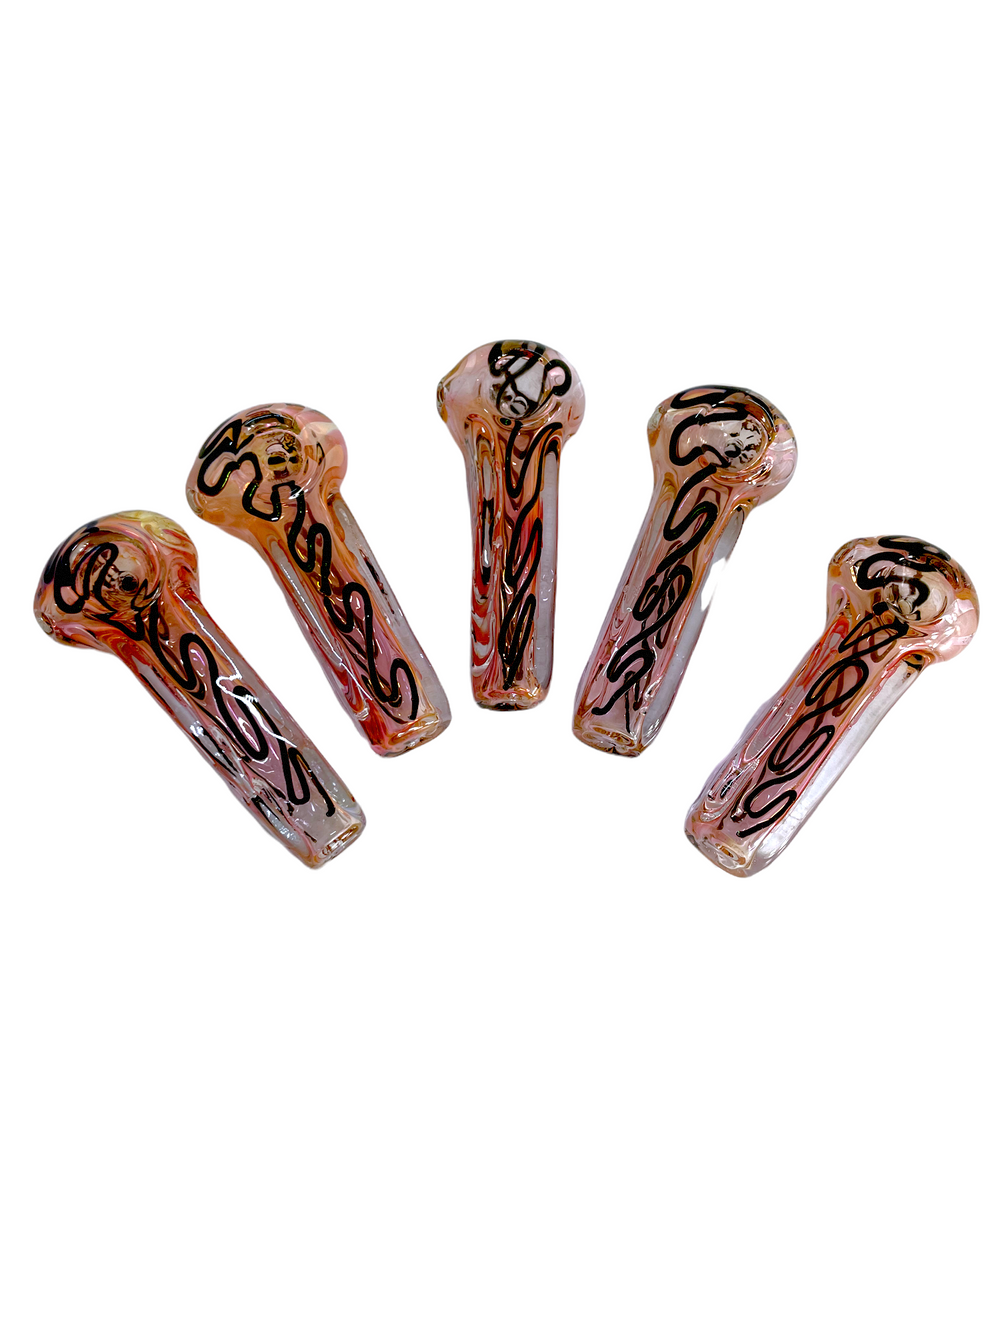 3.5" Fumed Square Thick Glass Hand Pipe W/Swirls